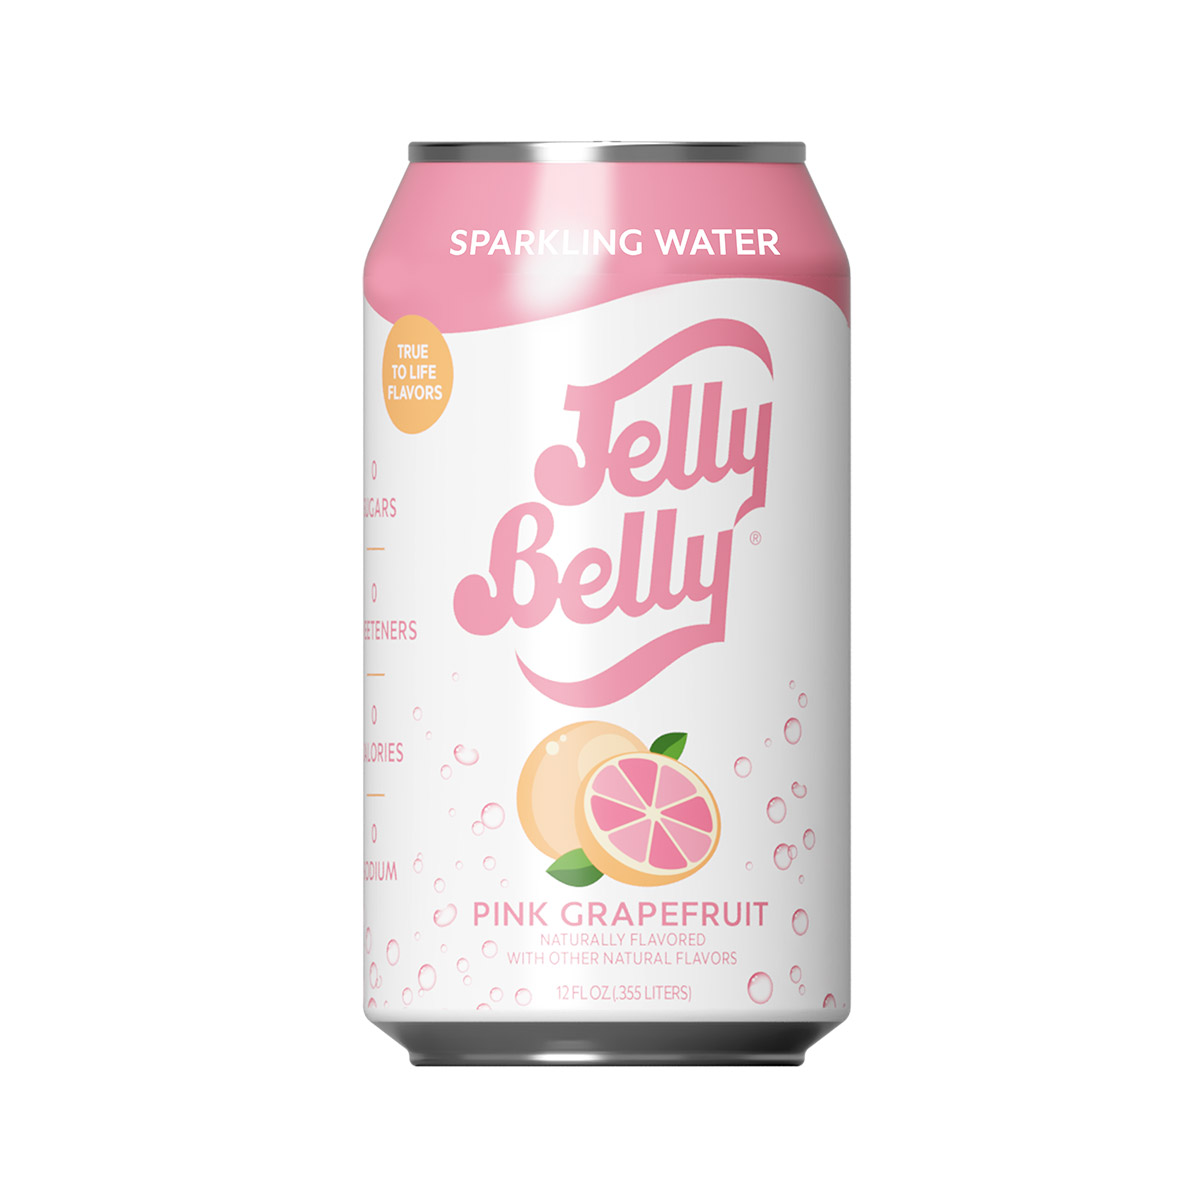 pink grapefruit jelly belly sparkling water